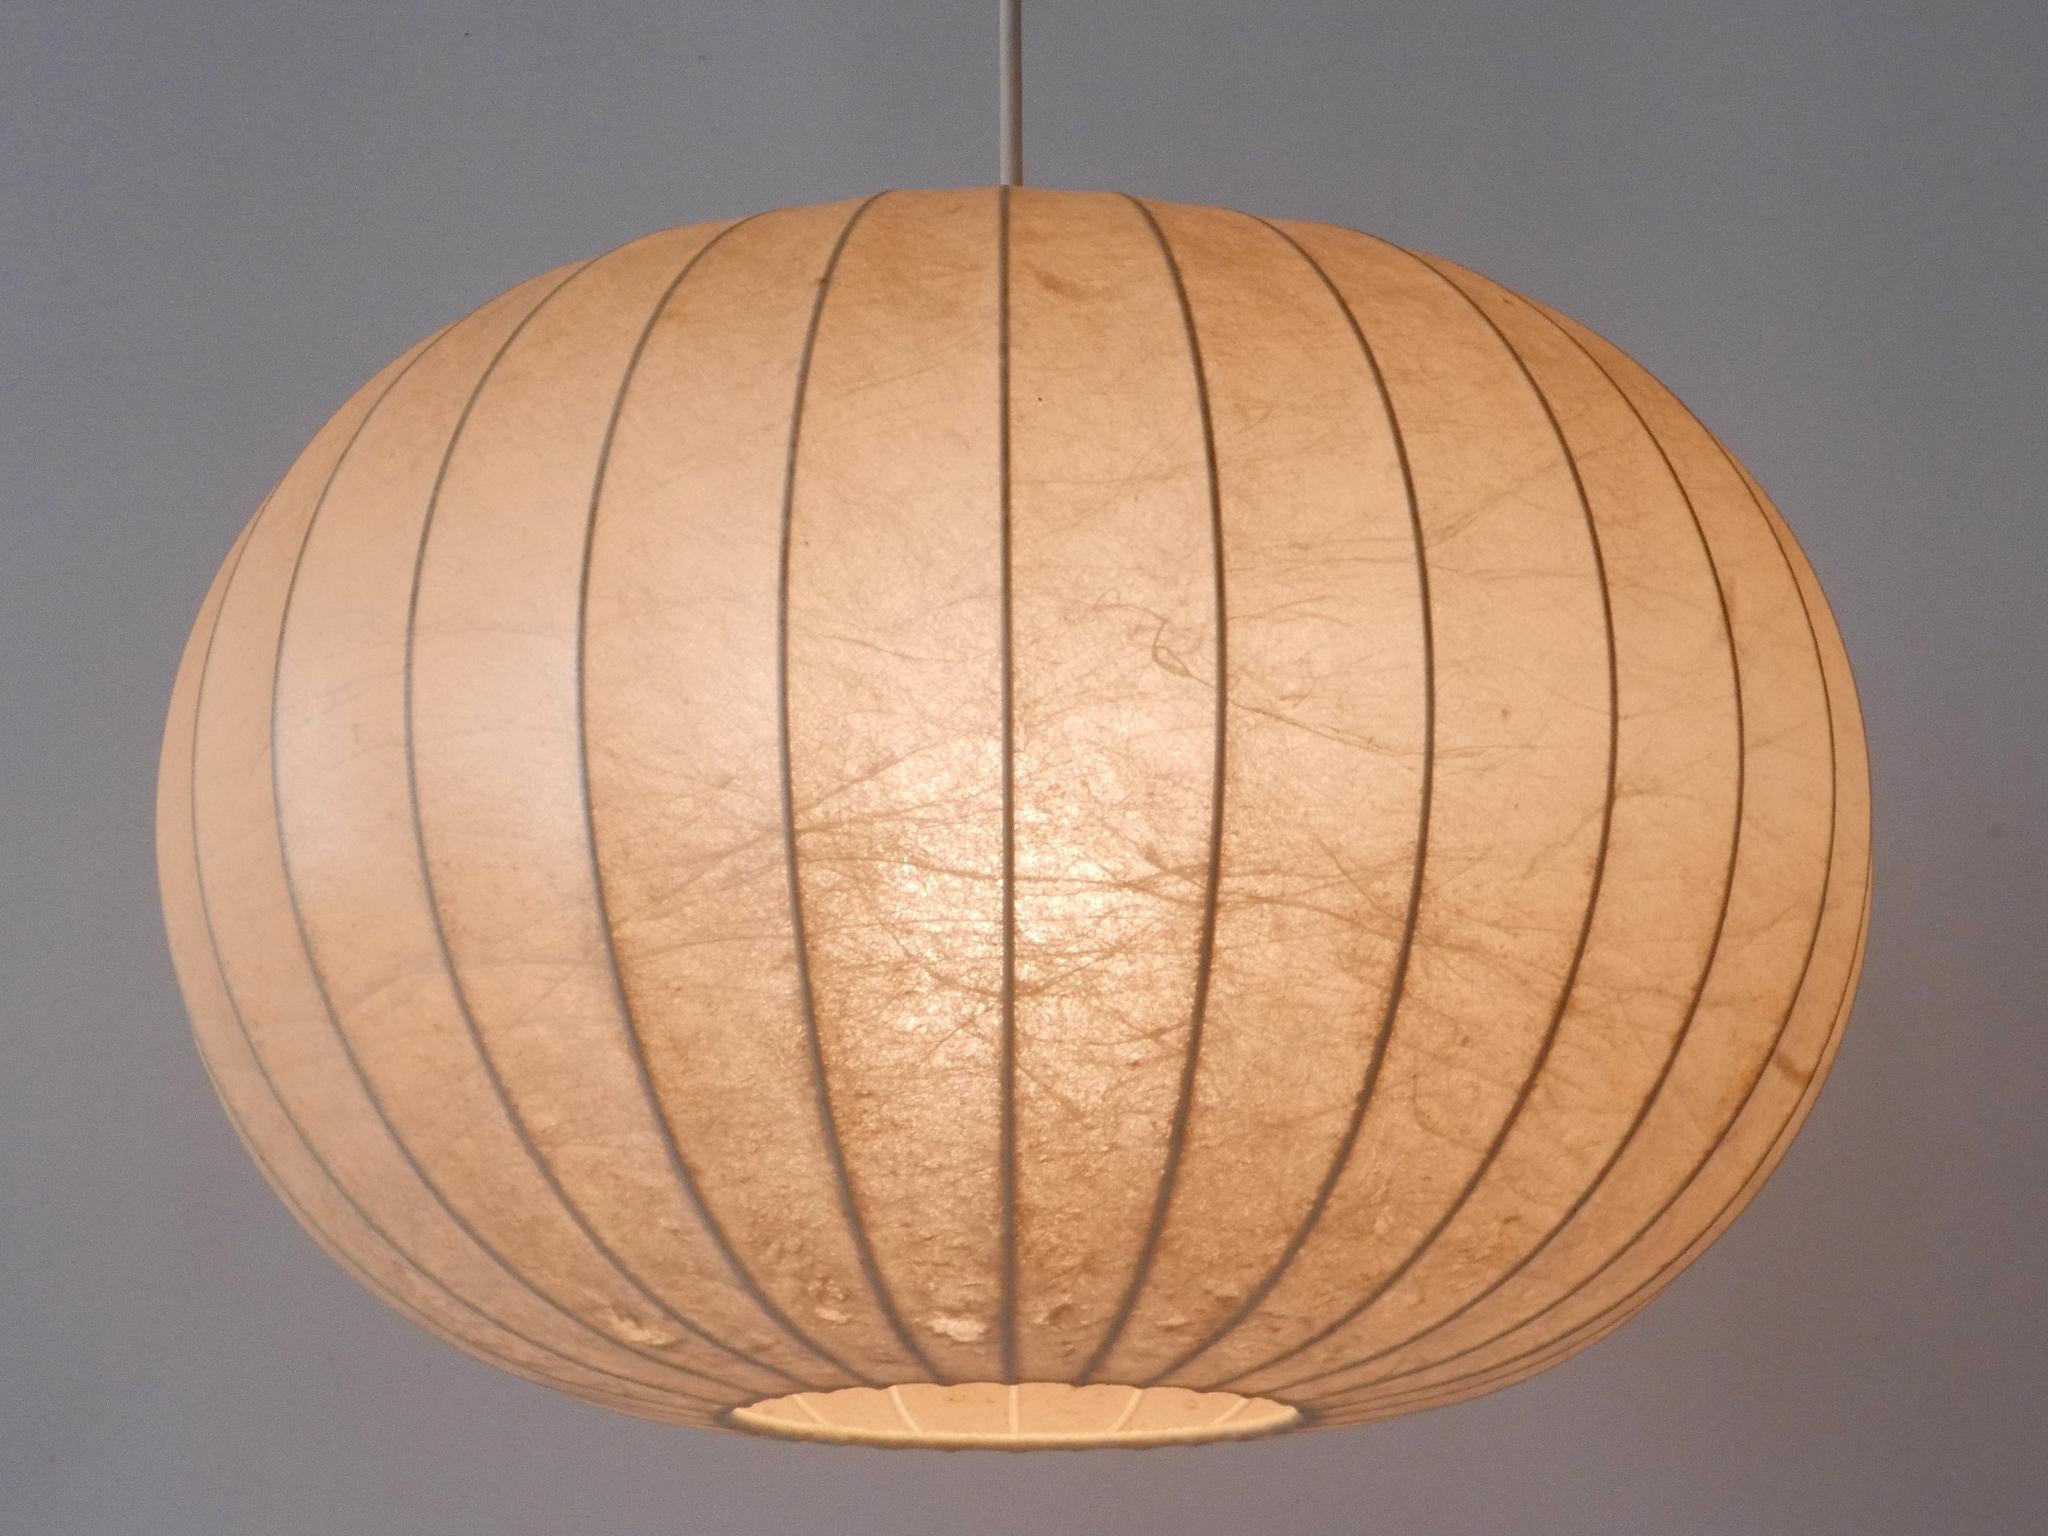 Elegant and highly decorative Mid-Century Modern cocoon pendant lamp or hanging light. Designed & manufactured probably by Goldkant Leuchten, Germany, 1960s.

Executed in sprayed latex material and metal, the pendant lamp needs 1 x E27 / E26